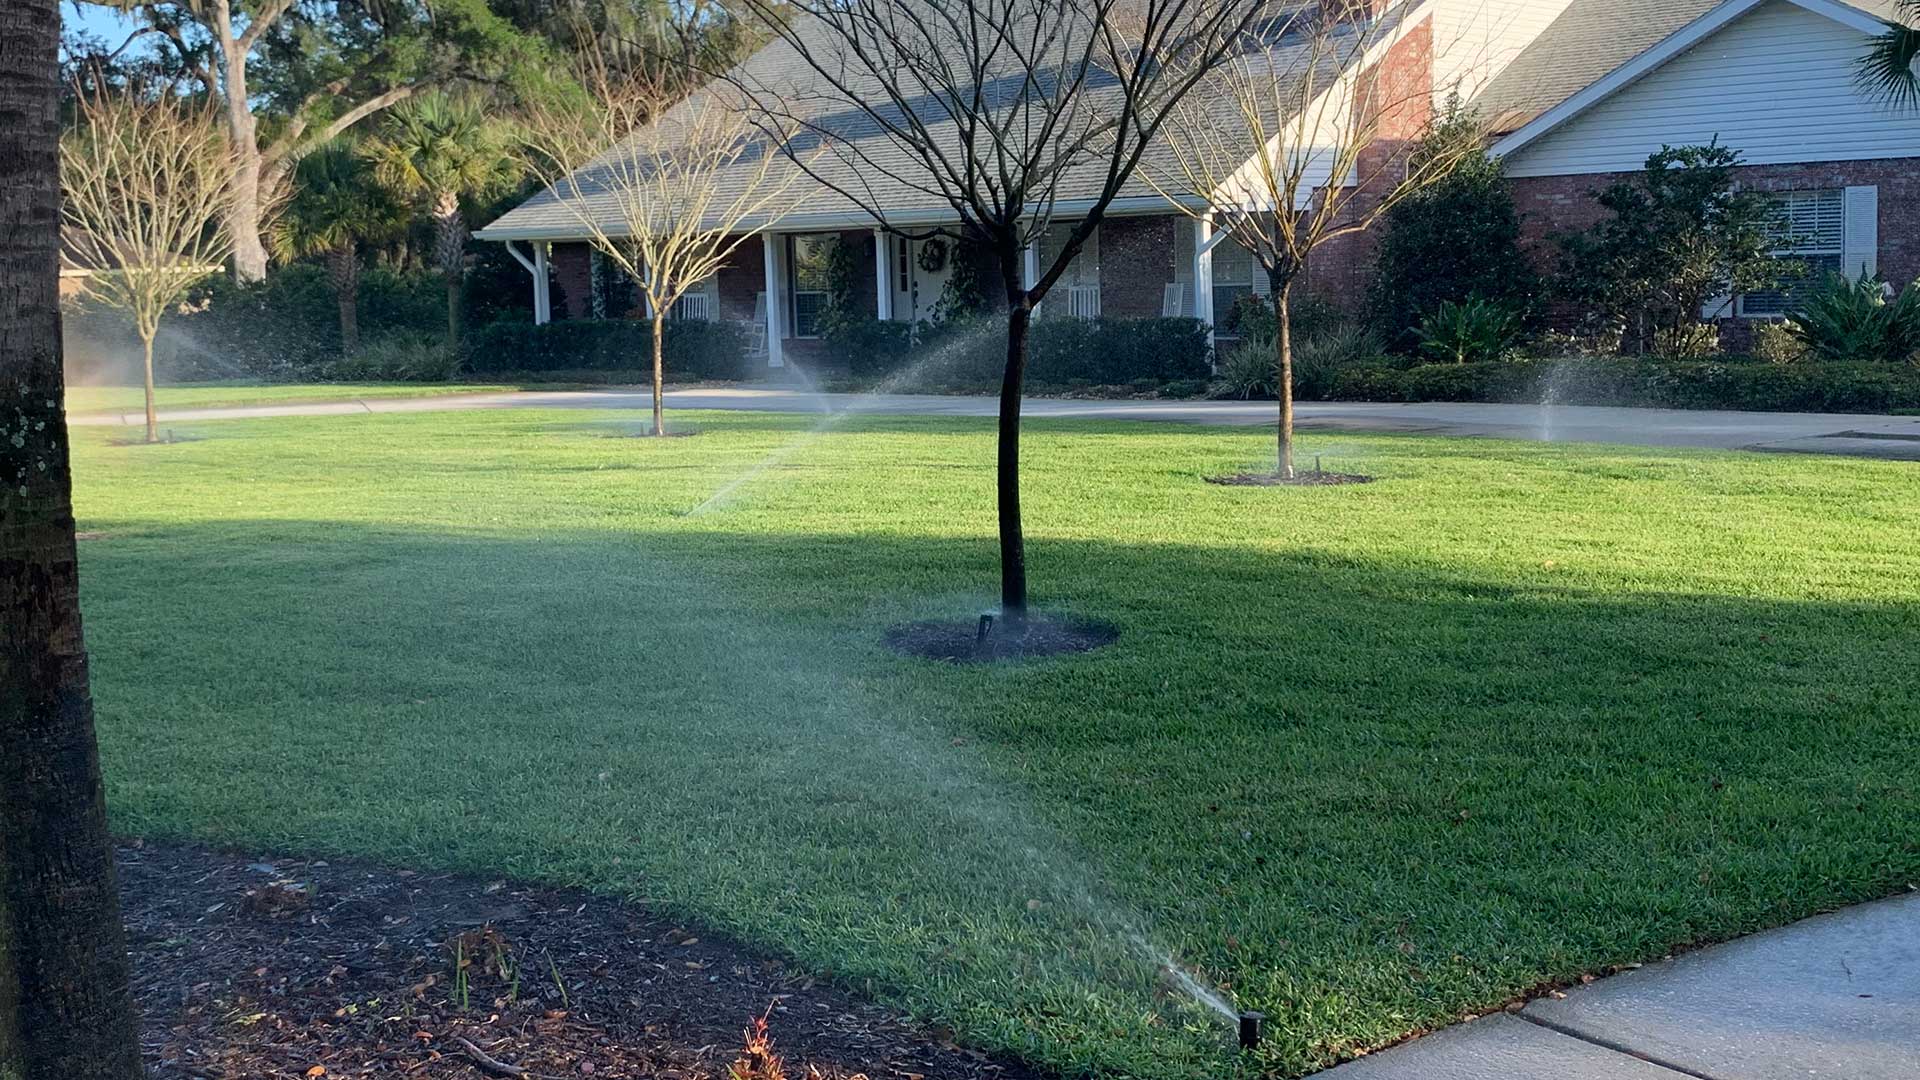 Sprinkler heads watering a lawn after or team installed a new irrigation system at a property located in Lakeland, FL.